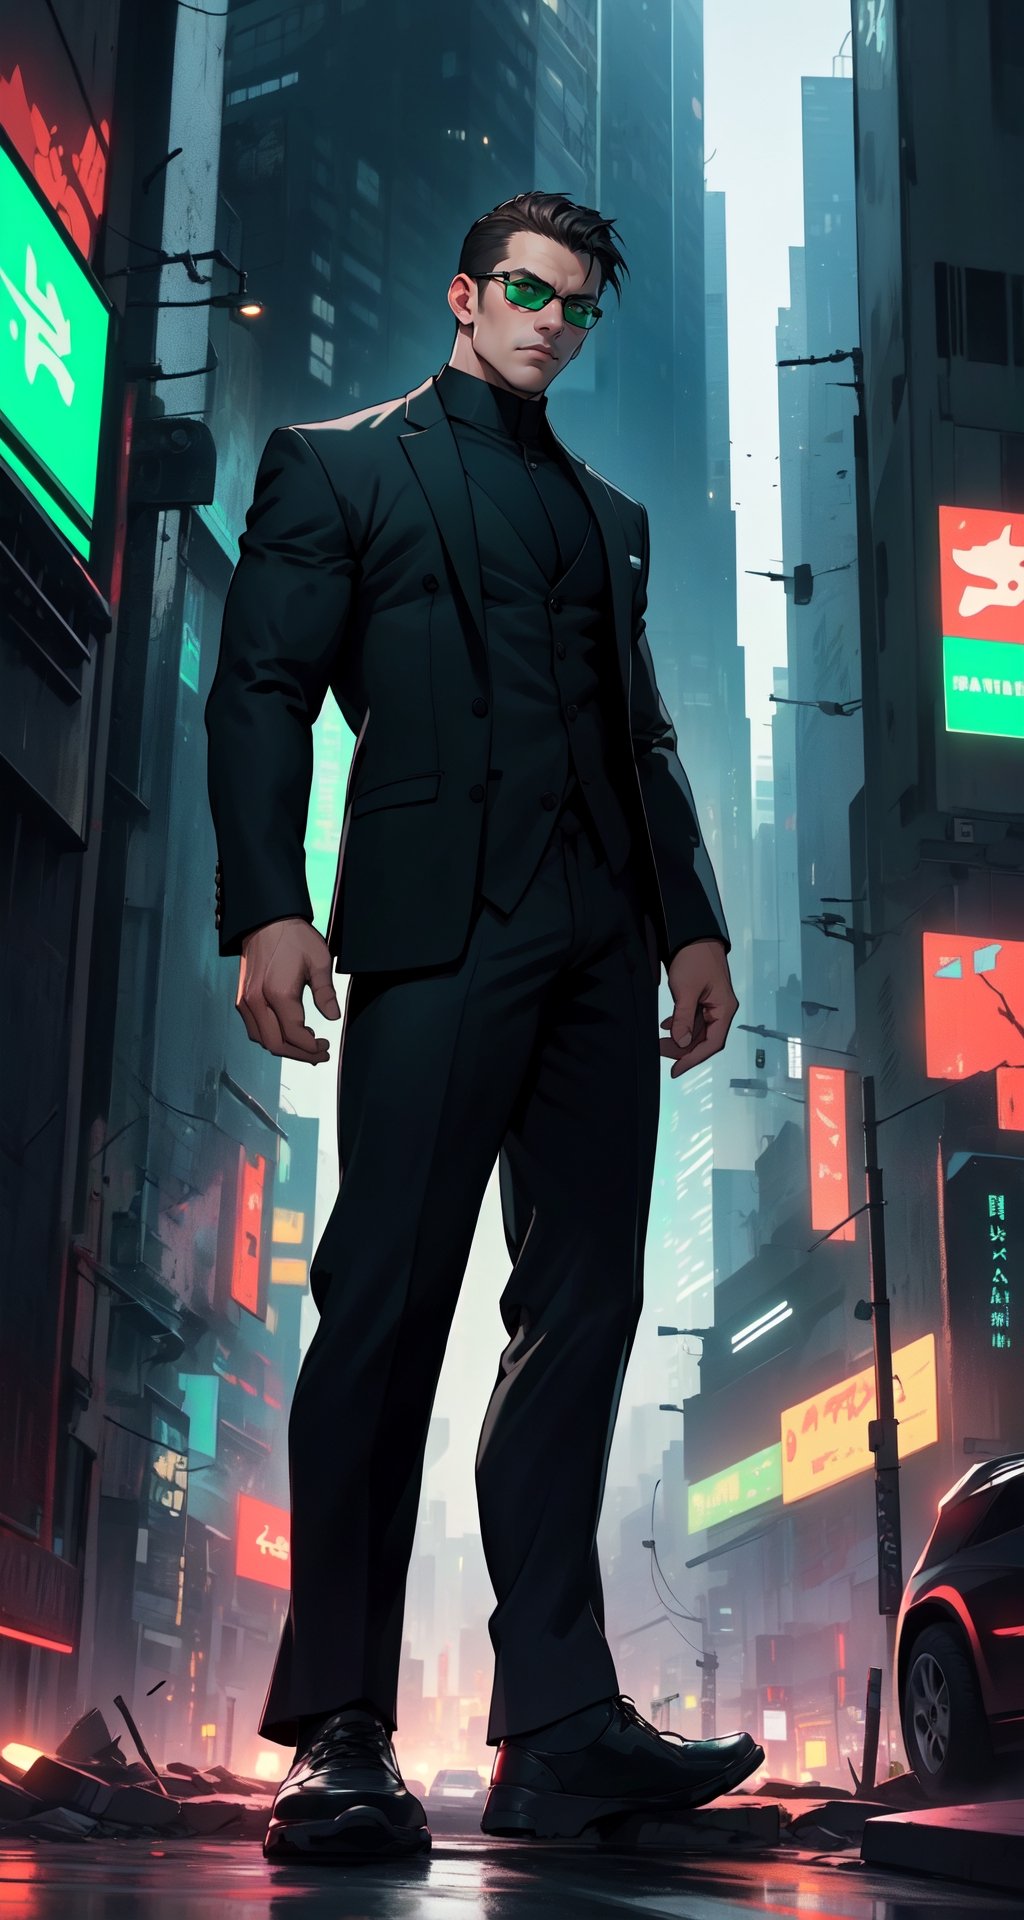 Master masterpiece, high-definition picture quality, matrix style, Matrix, ((1matureman)), the correct body proportion, black glasses, short-hair, brown_eyes, city, green, all-black suit, dark night, buildings, Code matrix cascading from top to bottom, Cyberpunk